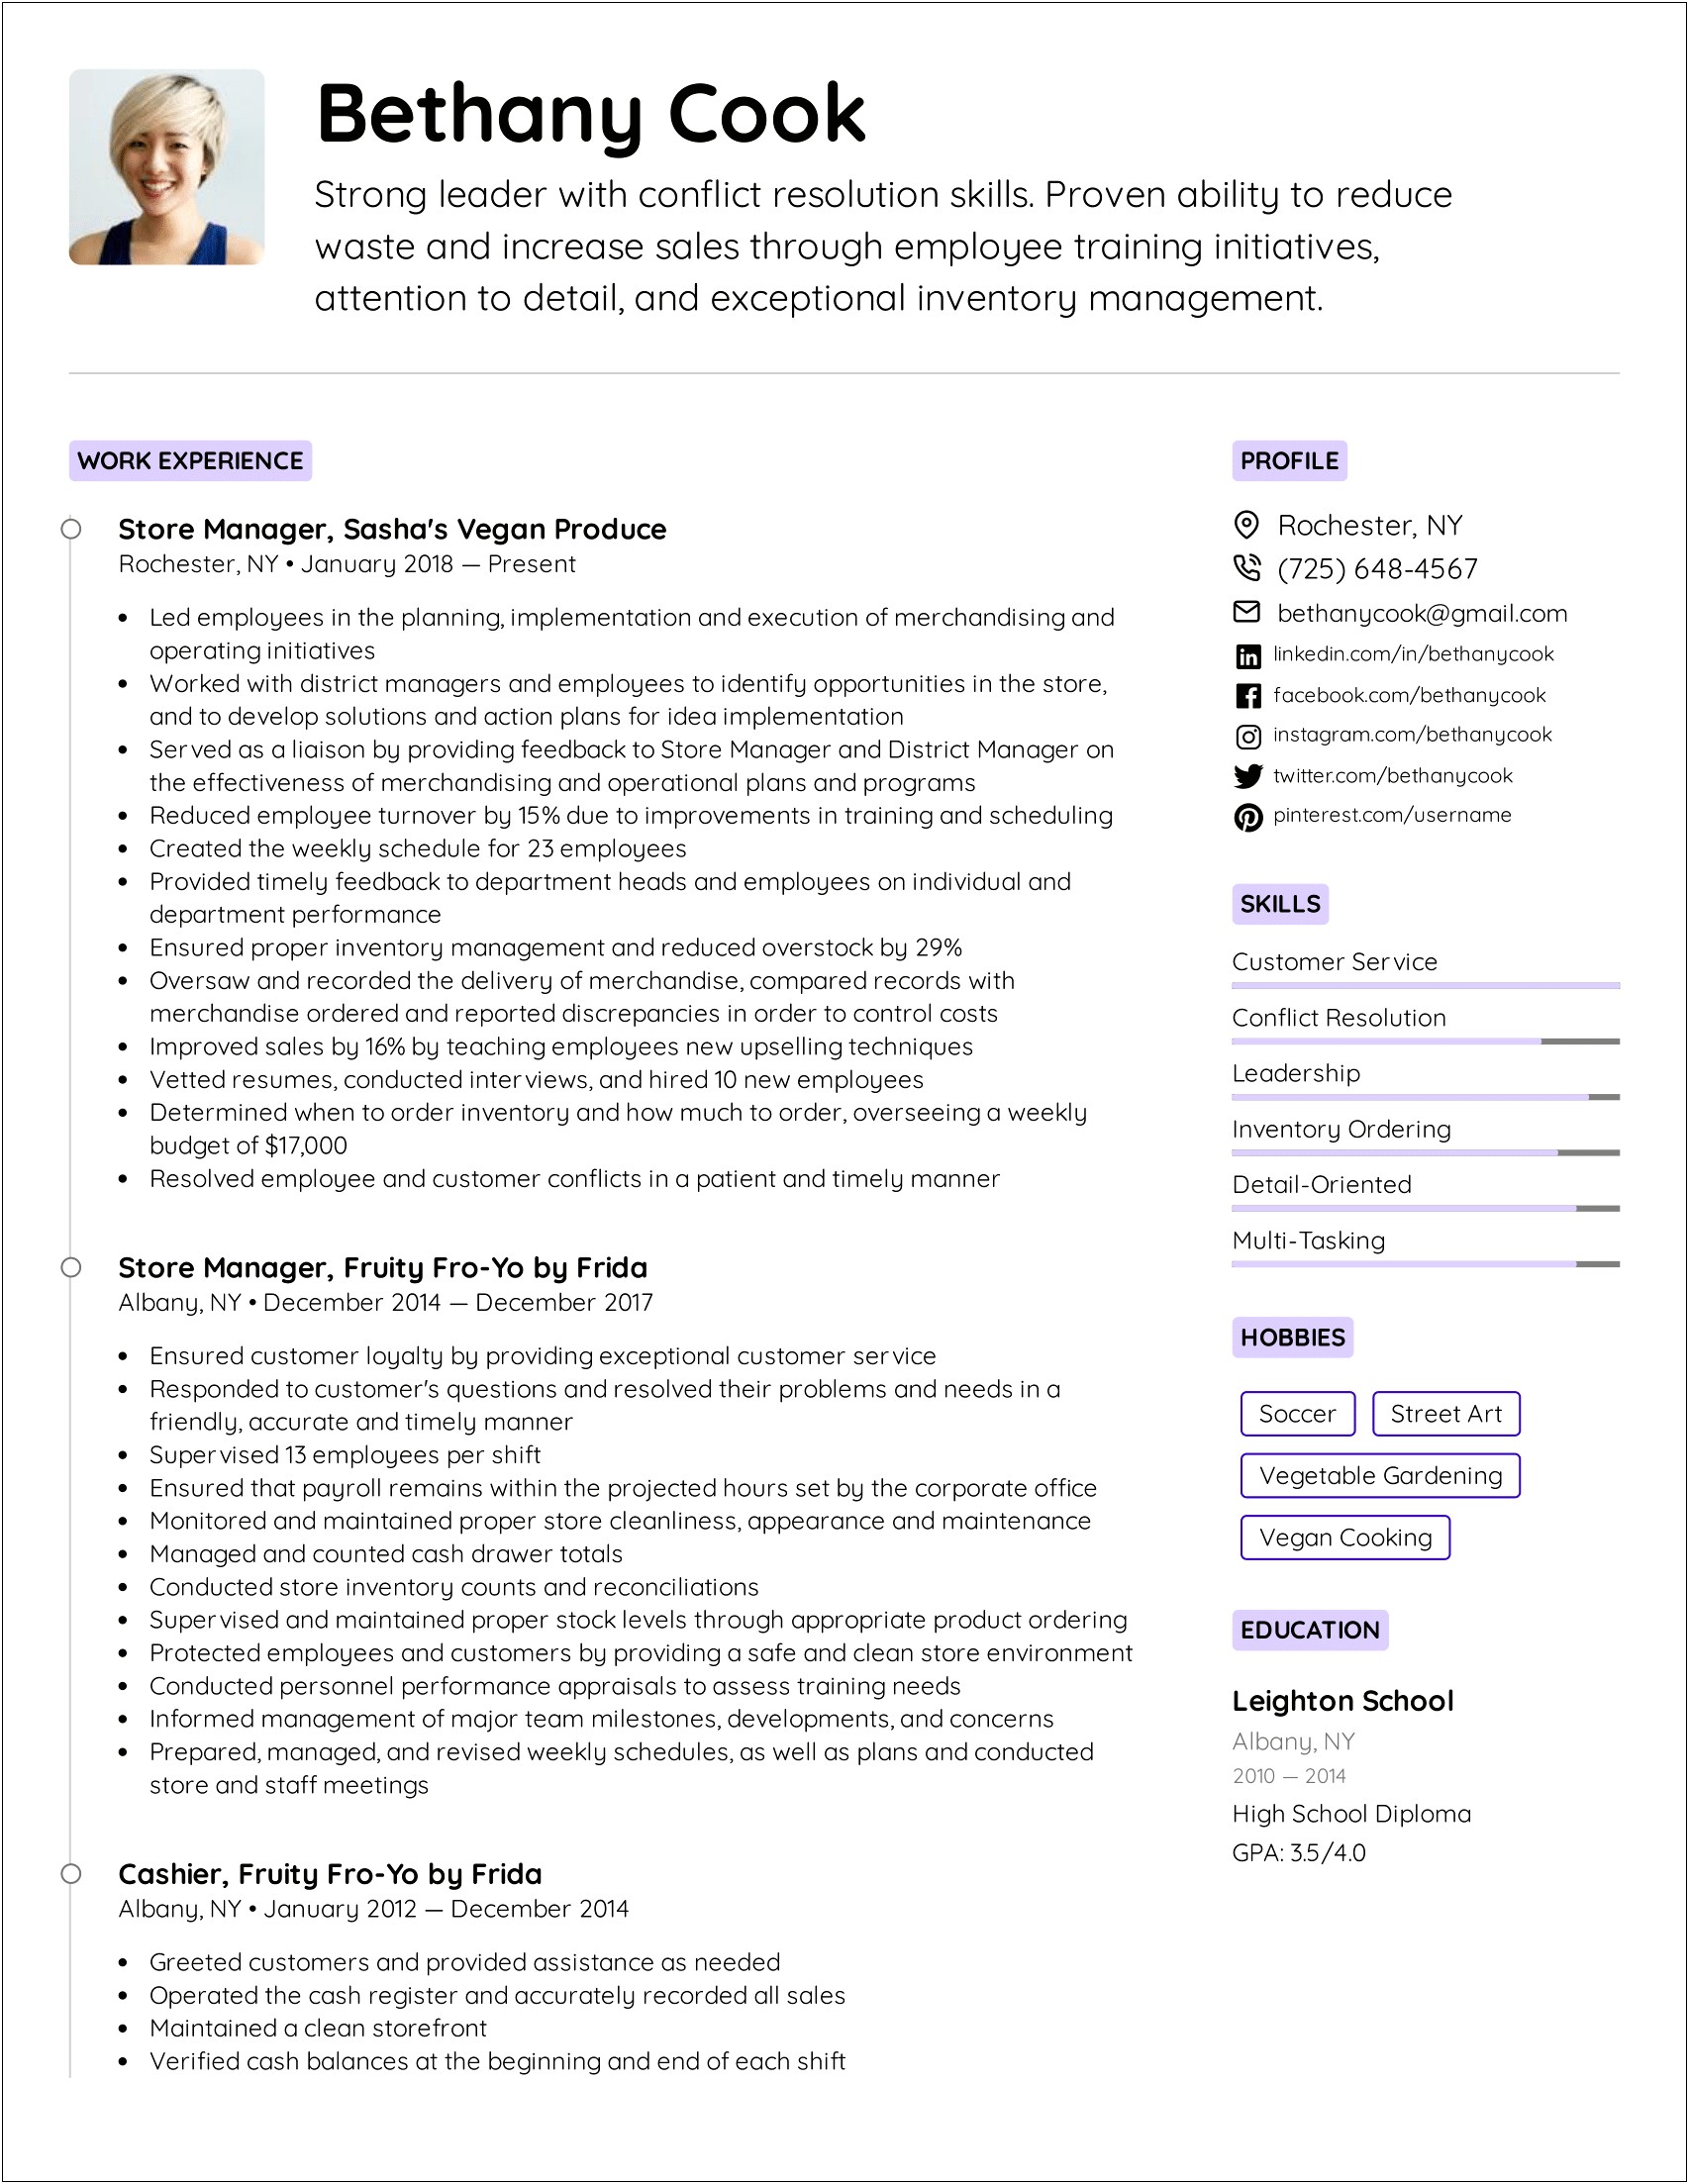 Retail Management With Promotions On Resume